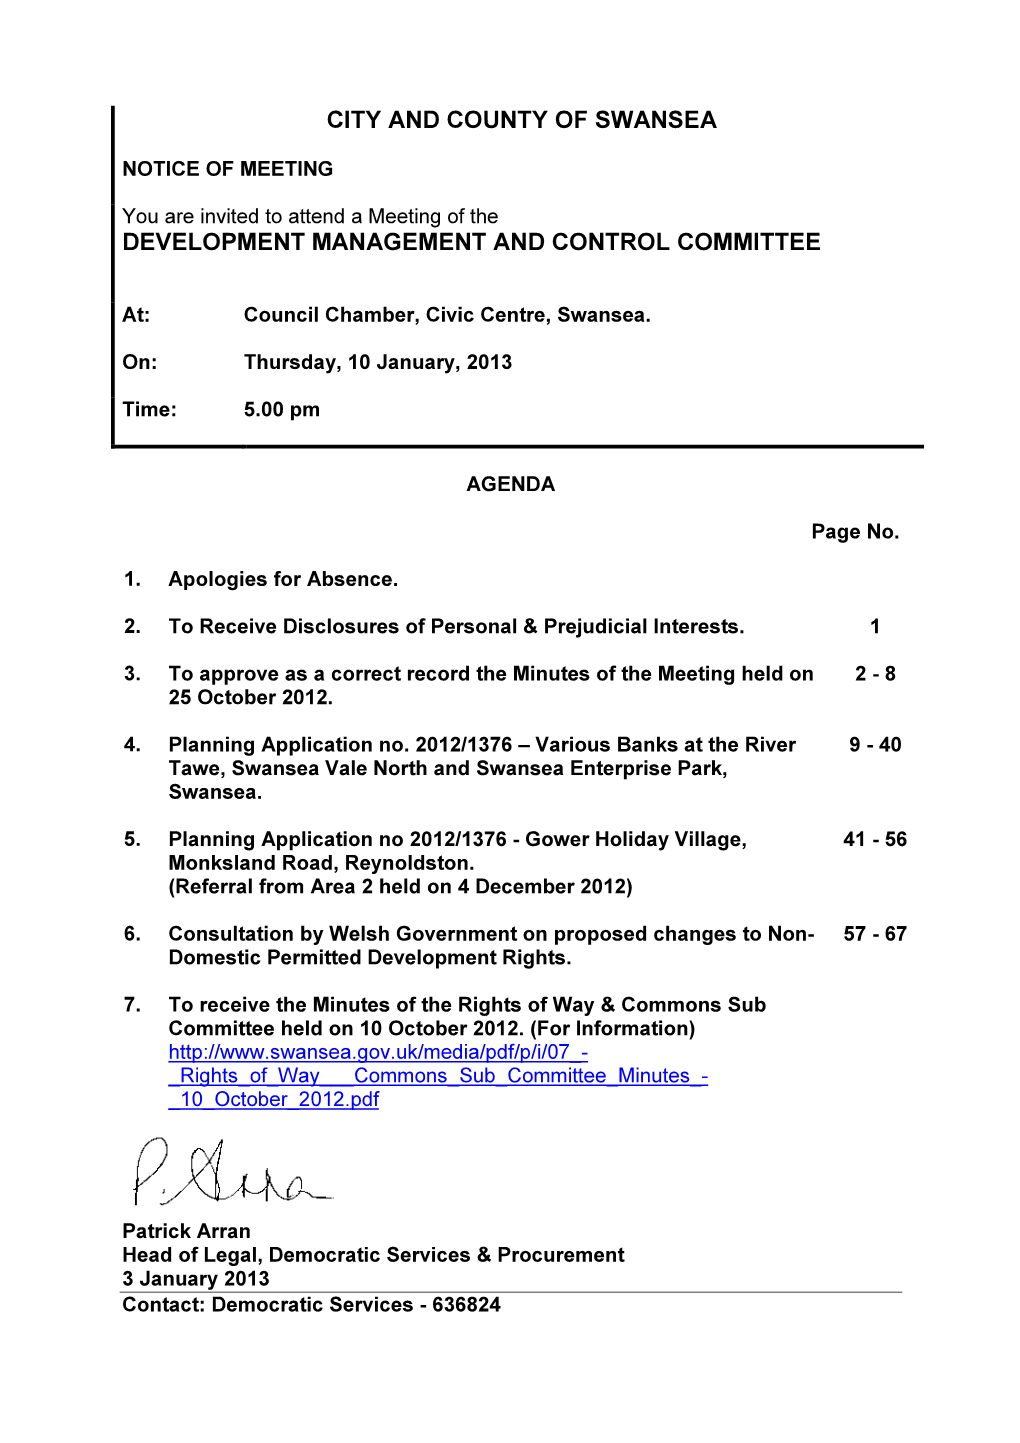 City and County of Swansea Development Management and Control Committee